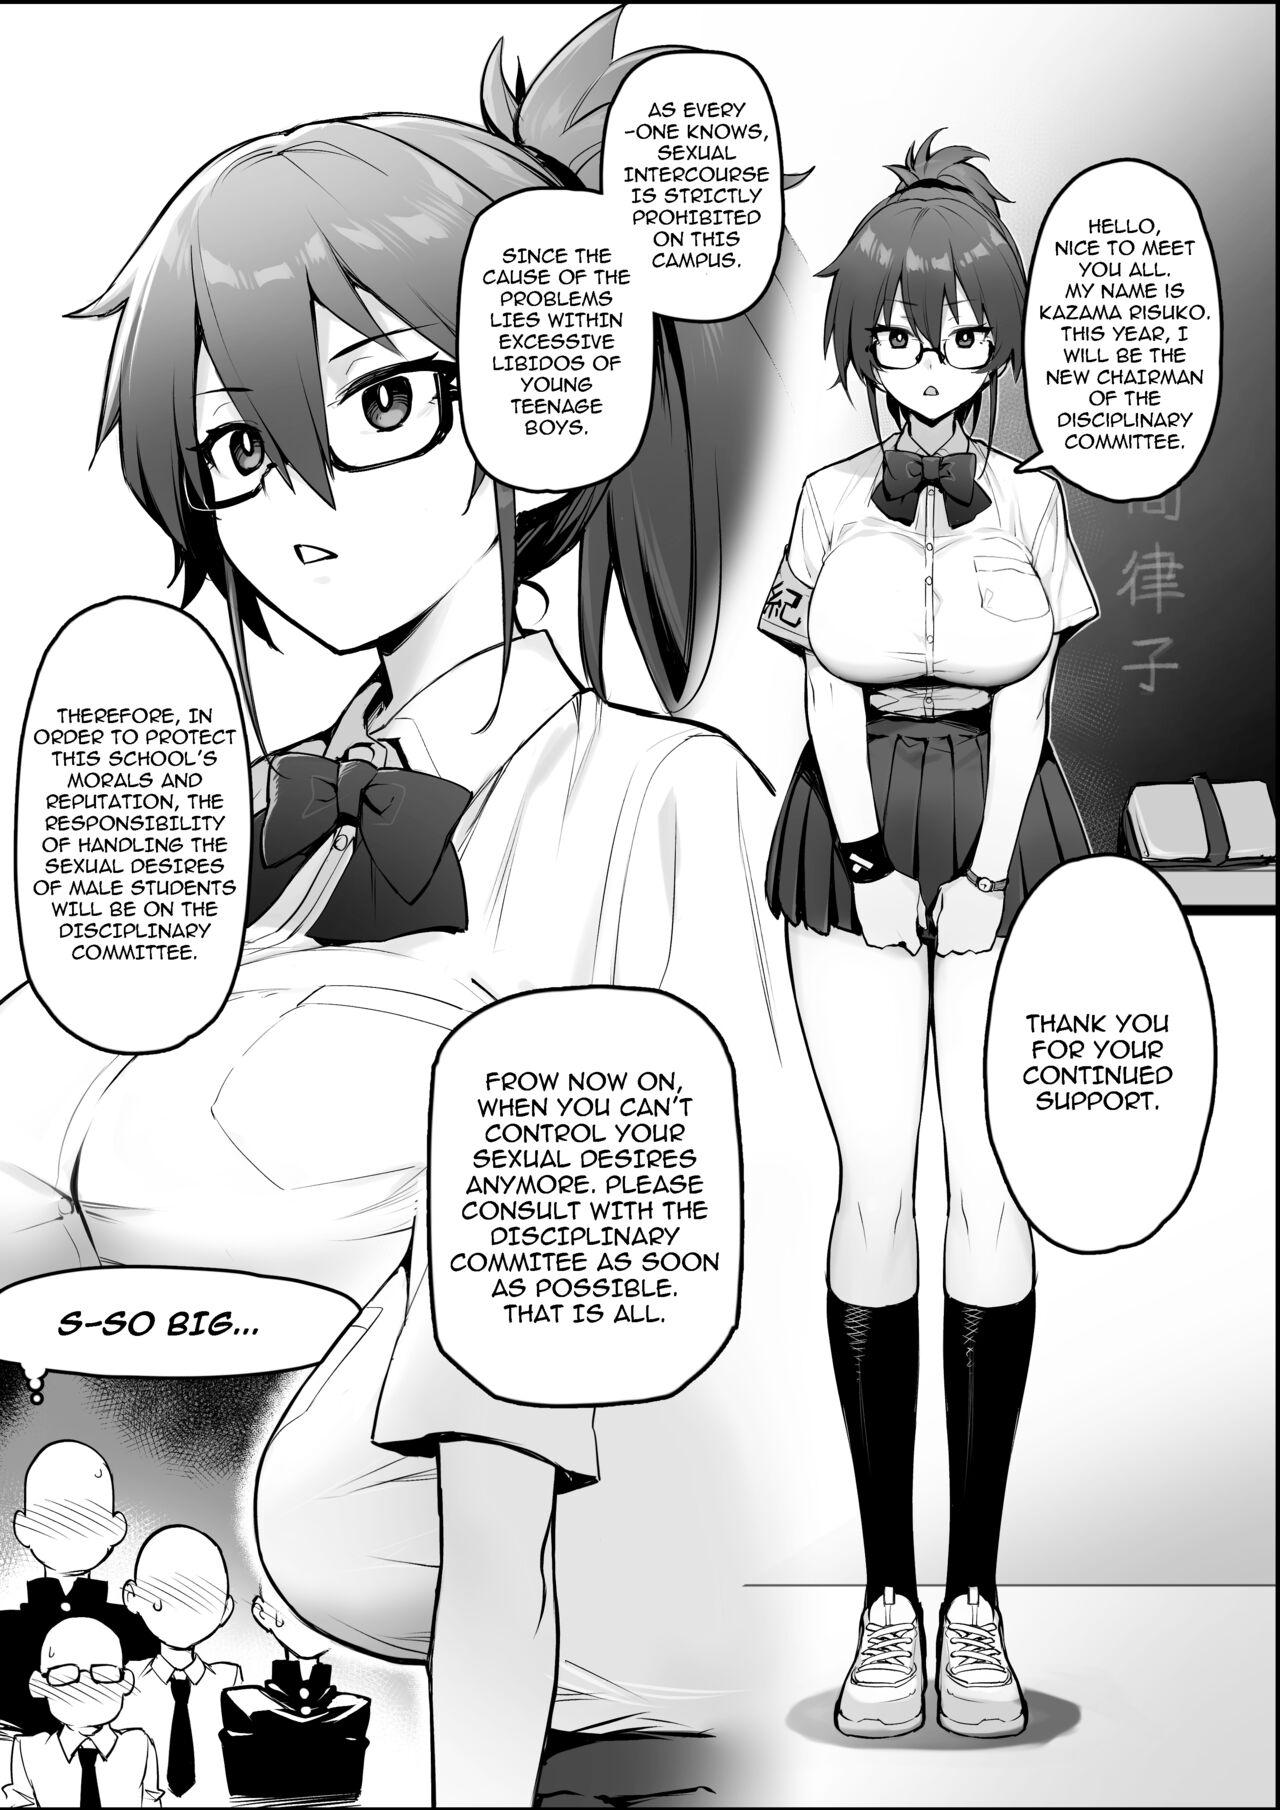 Dick Suck Rumor Has It That The New Chairman of Disciplinary Committee Has Huge Breasts. - Original Naked Sex - Page 7